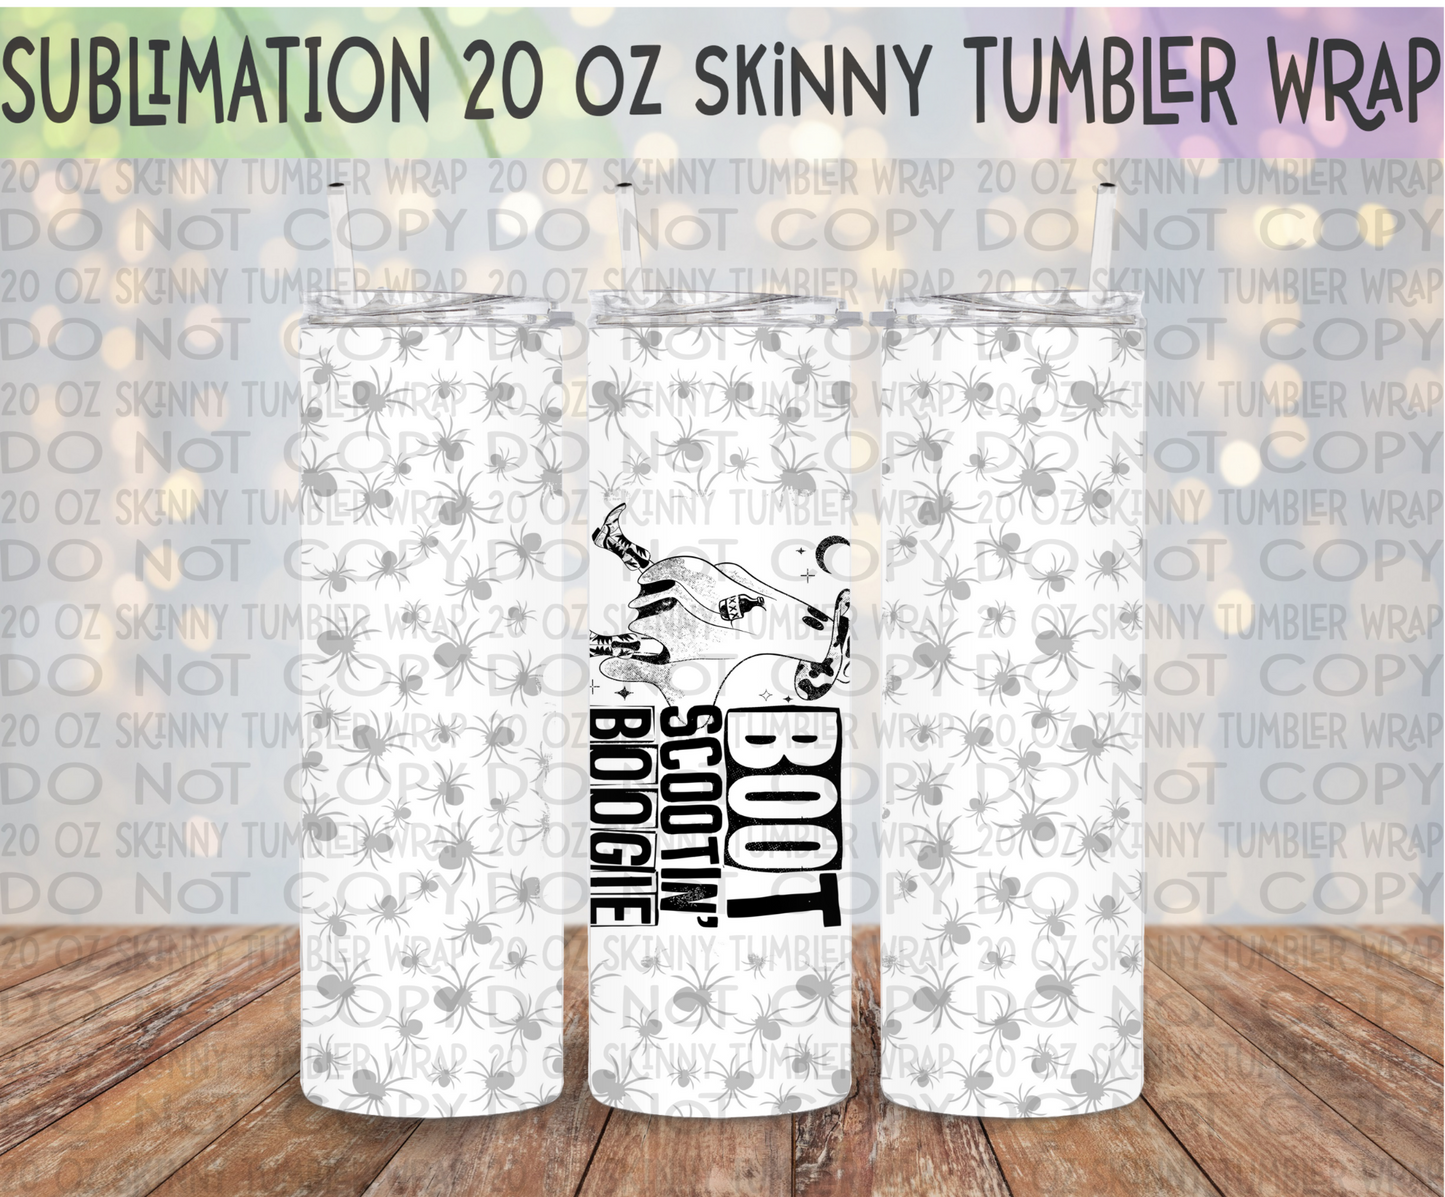 Boot Scootin Boogie 20 Oz Skinny Tumbler Wrap - Sublimation Transfer - RTS